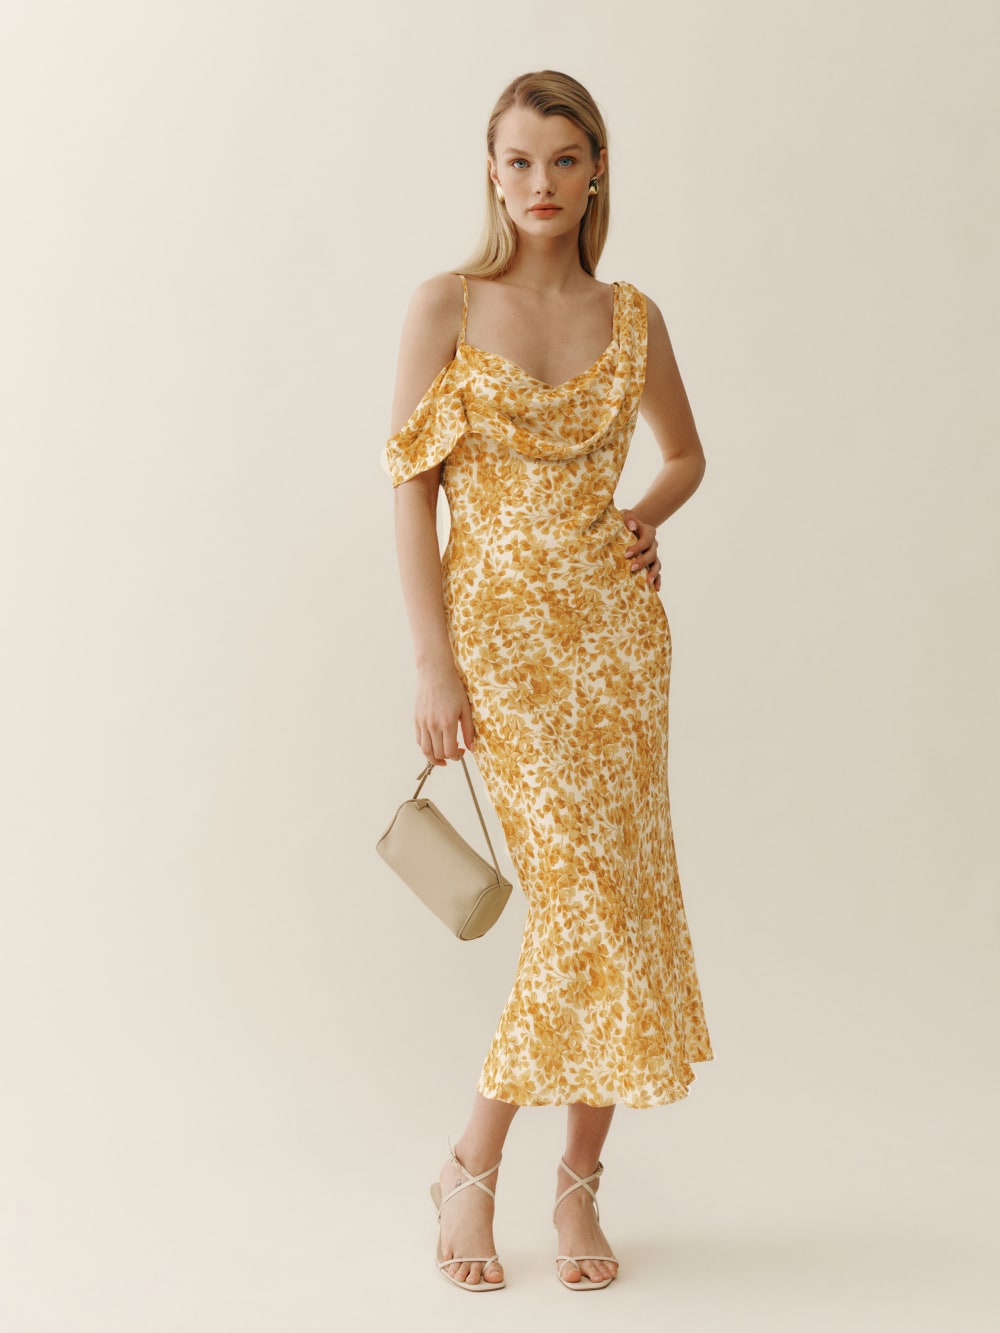 2024 wedding guest outfits - Reformation Reya midi Dress with asymmetric ruffle strap detail is fitted throughout and has a pretty yellow floral pattern. 